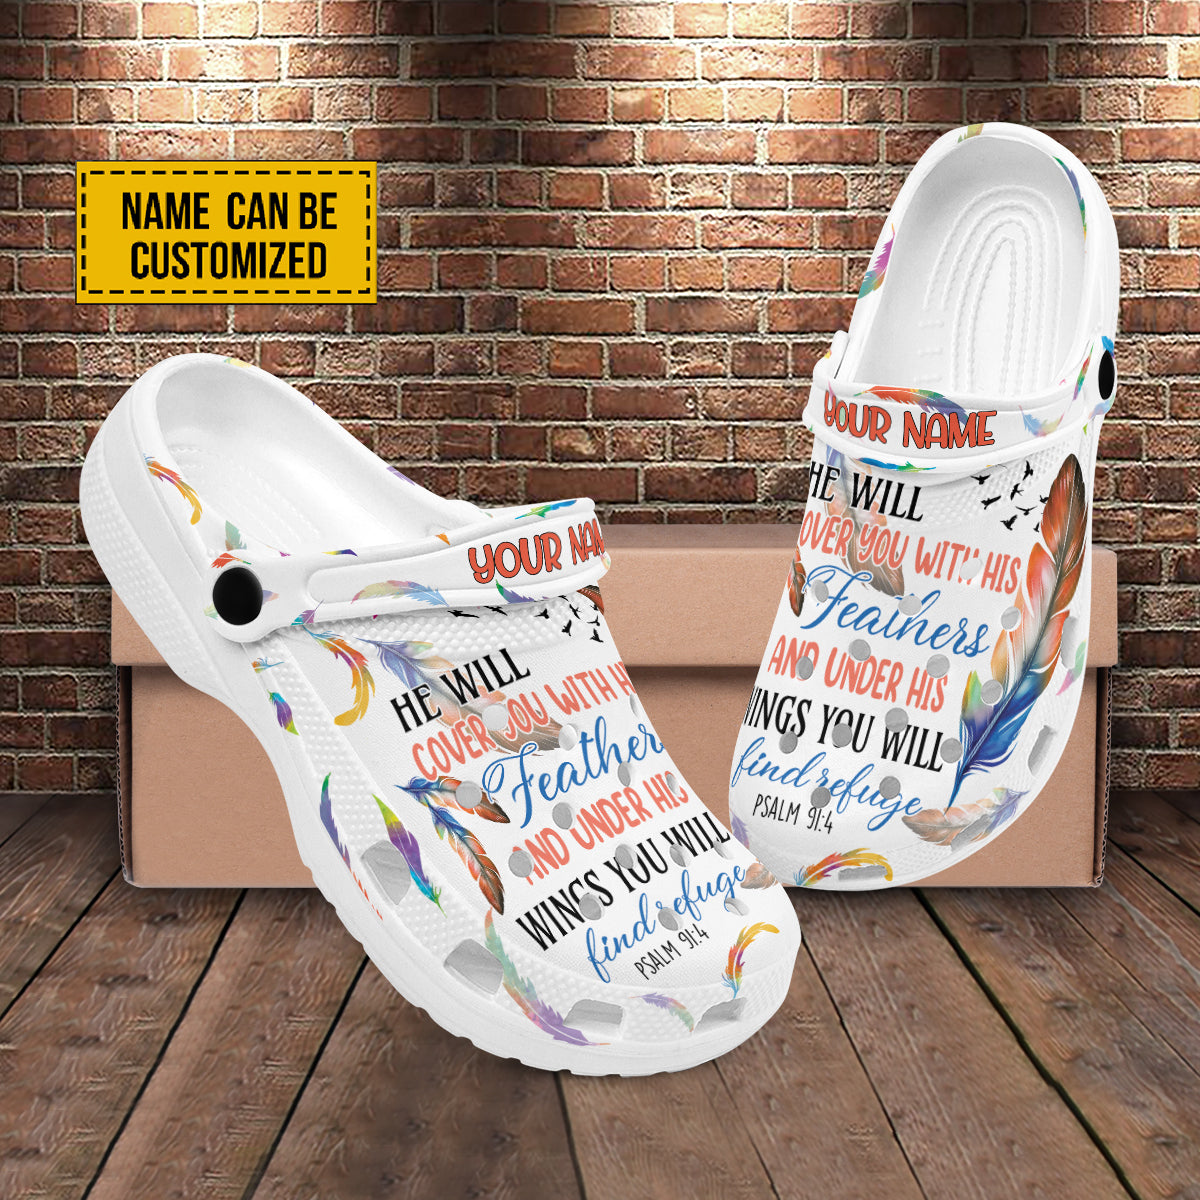 Teesdily | He Will Cover You With His Feathers And Under His Wings Customized Clogs, Gift For Jesus Lovers, God Faith Believers, Christian Gifts, Kid & Adult Unisex Clogs Shoes Eva